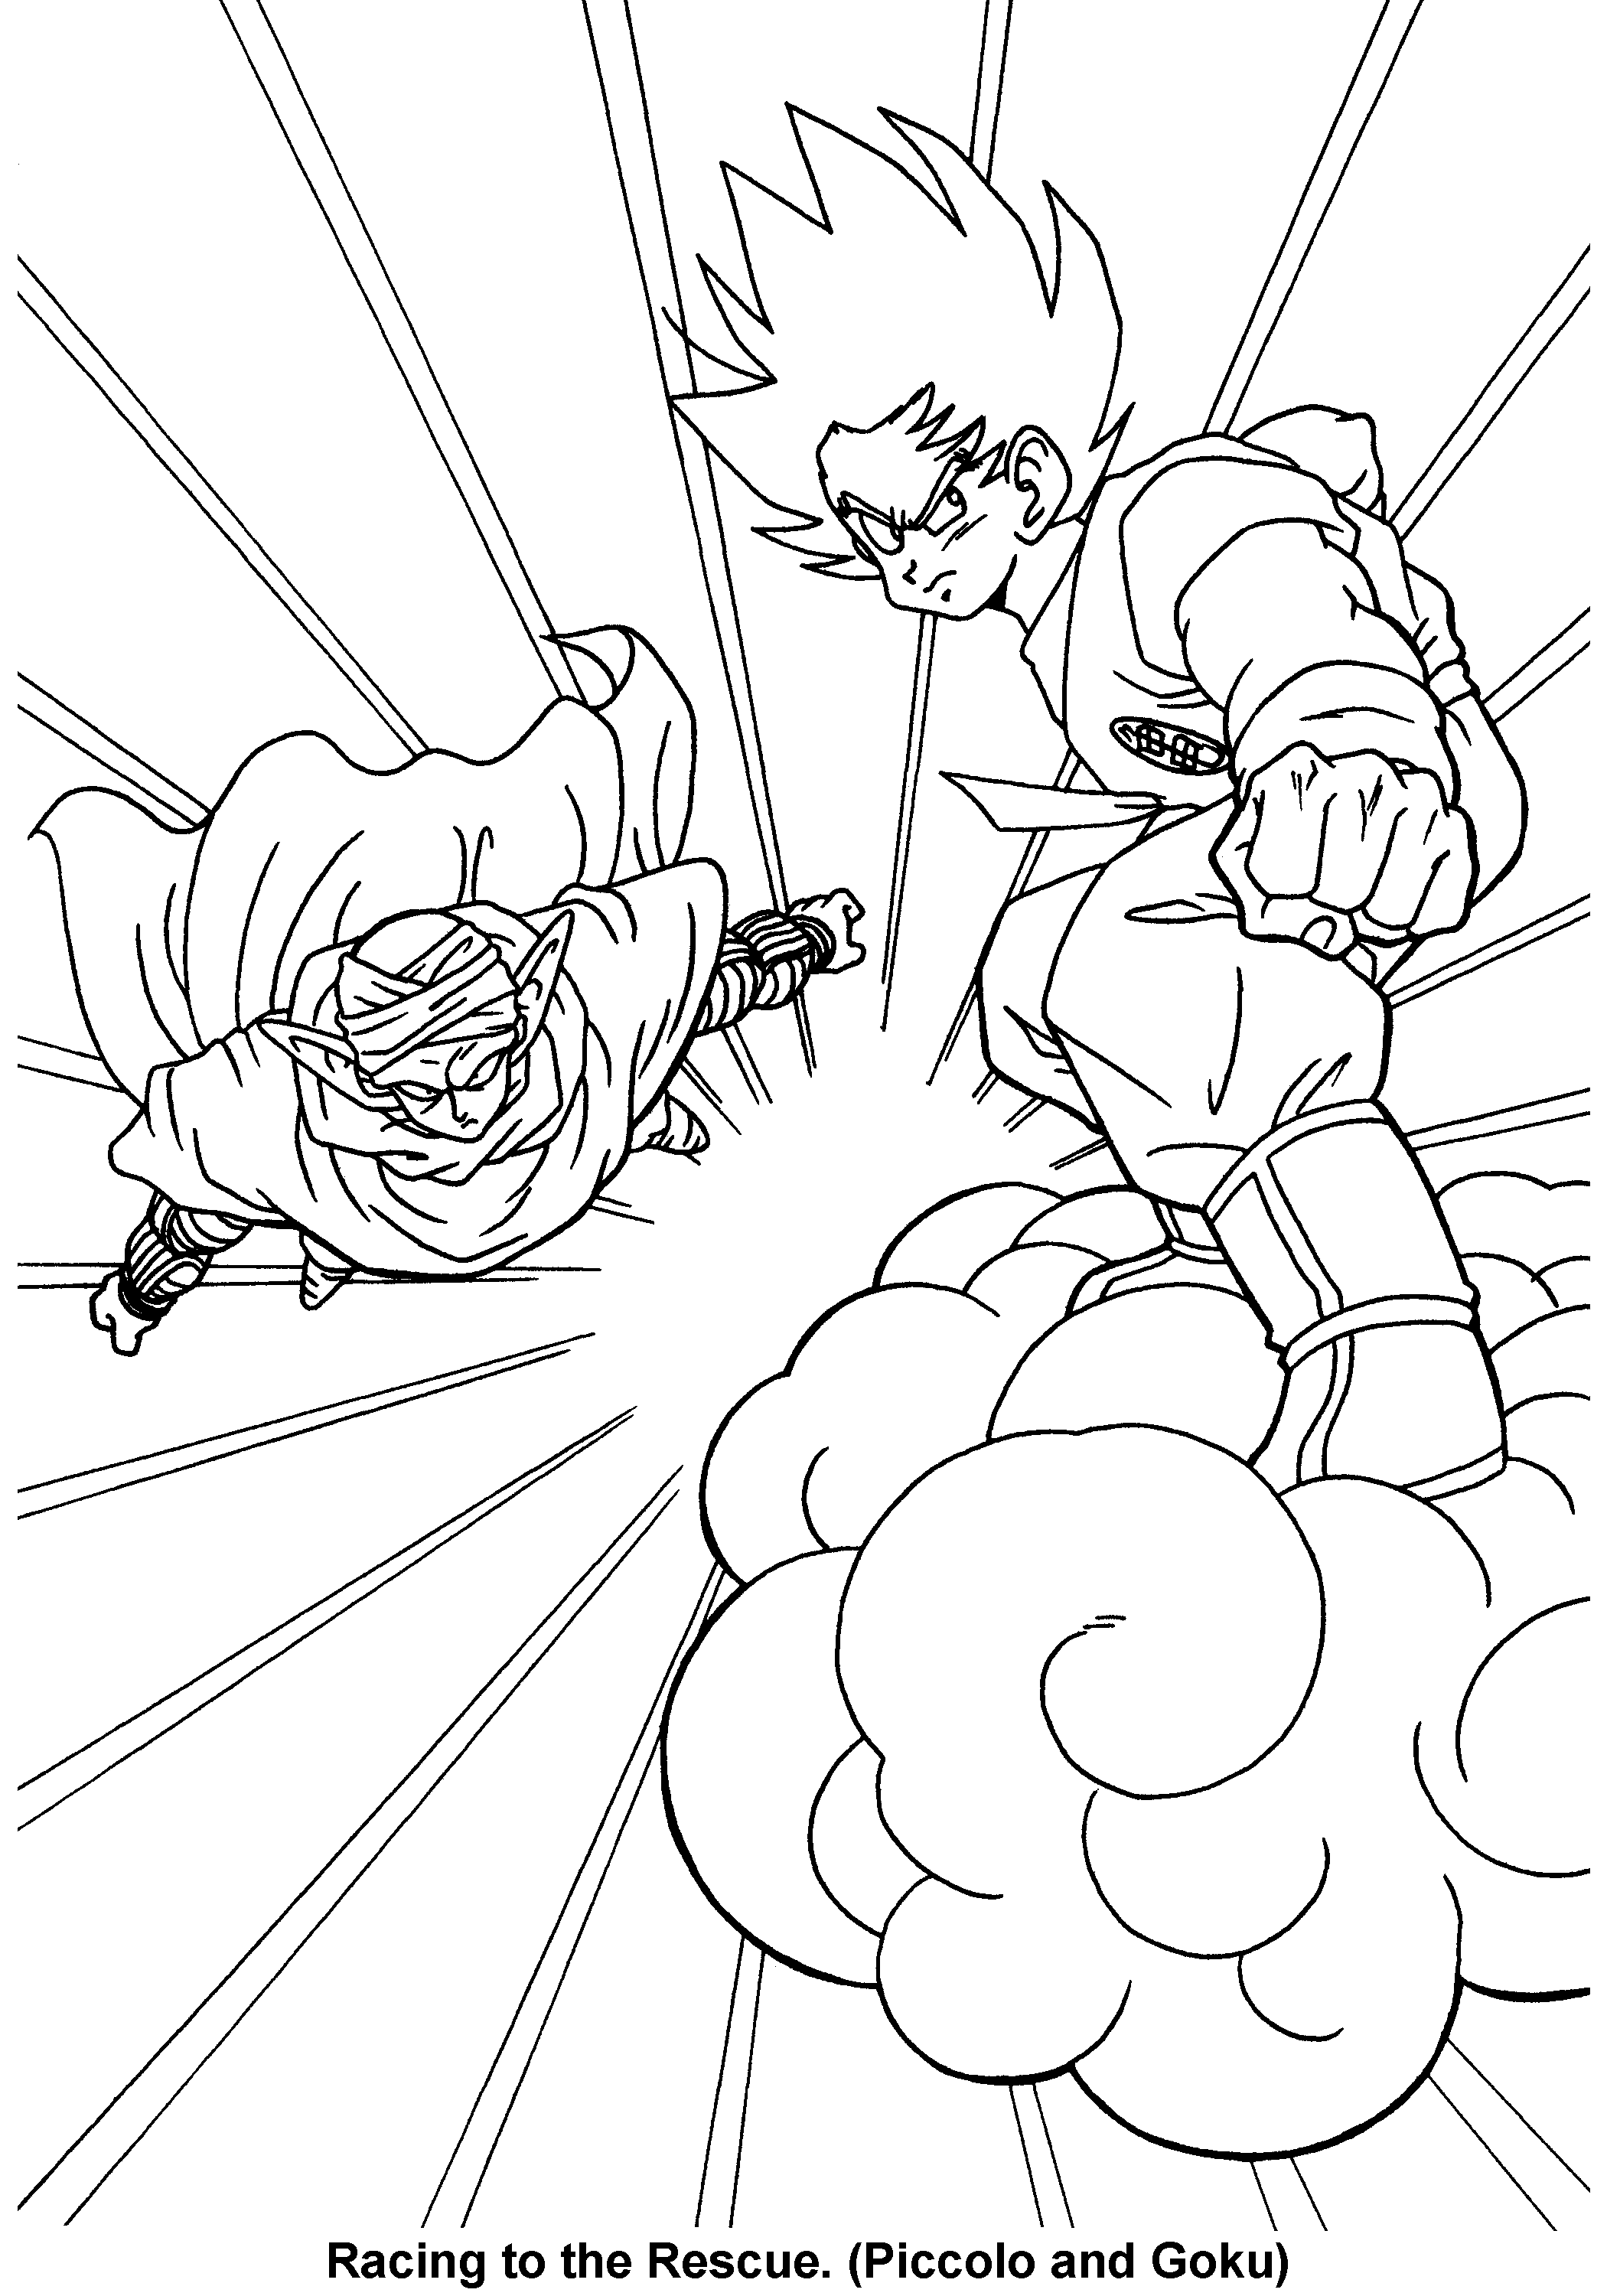 coloring-page-dragon-ball-z-coloring-pages-59